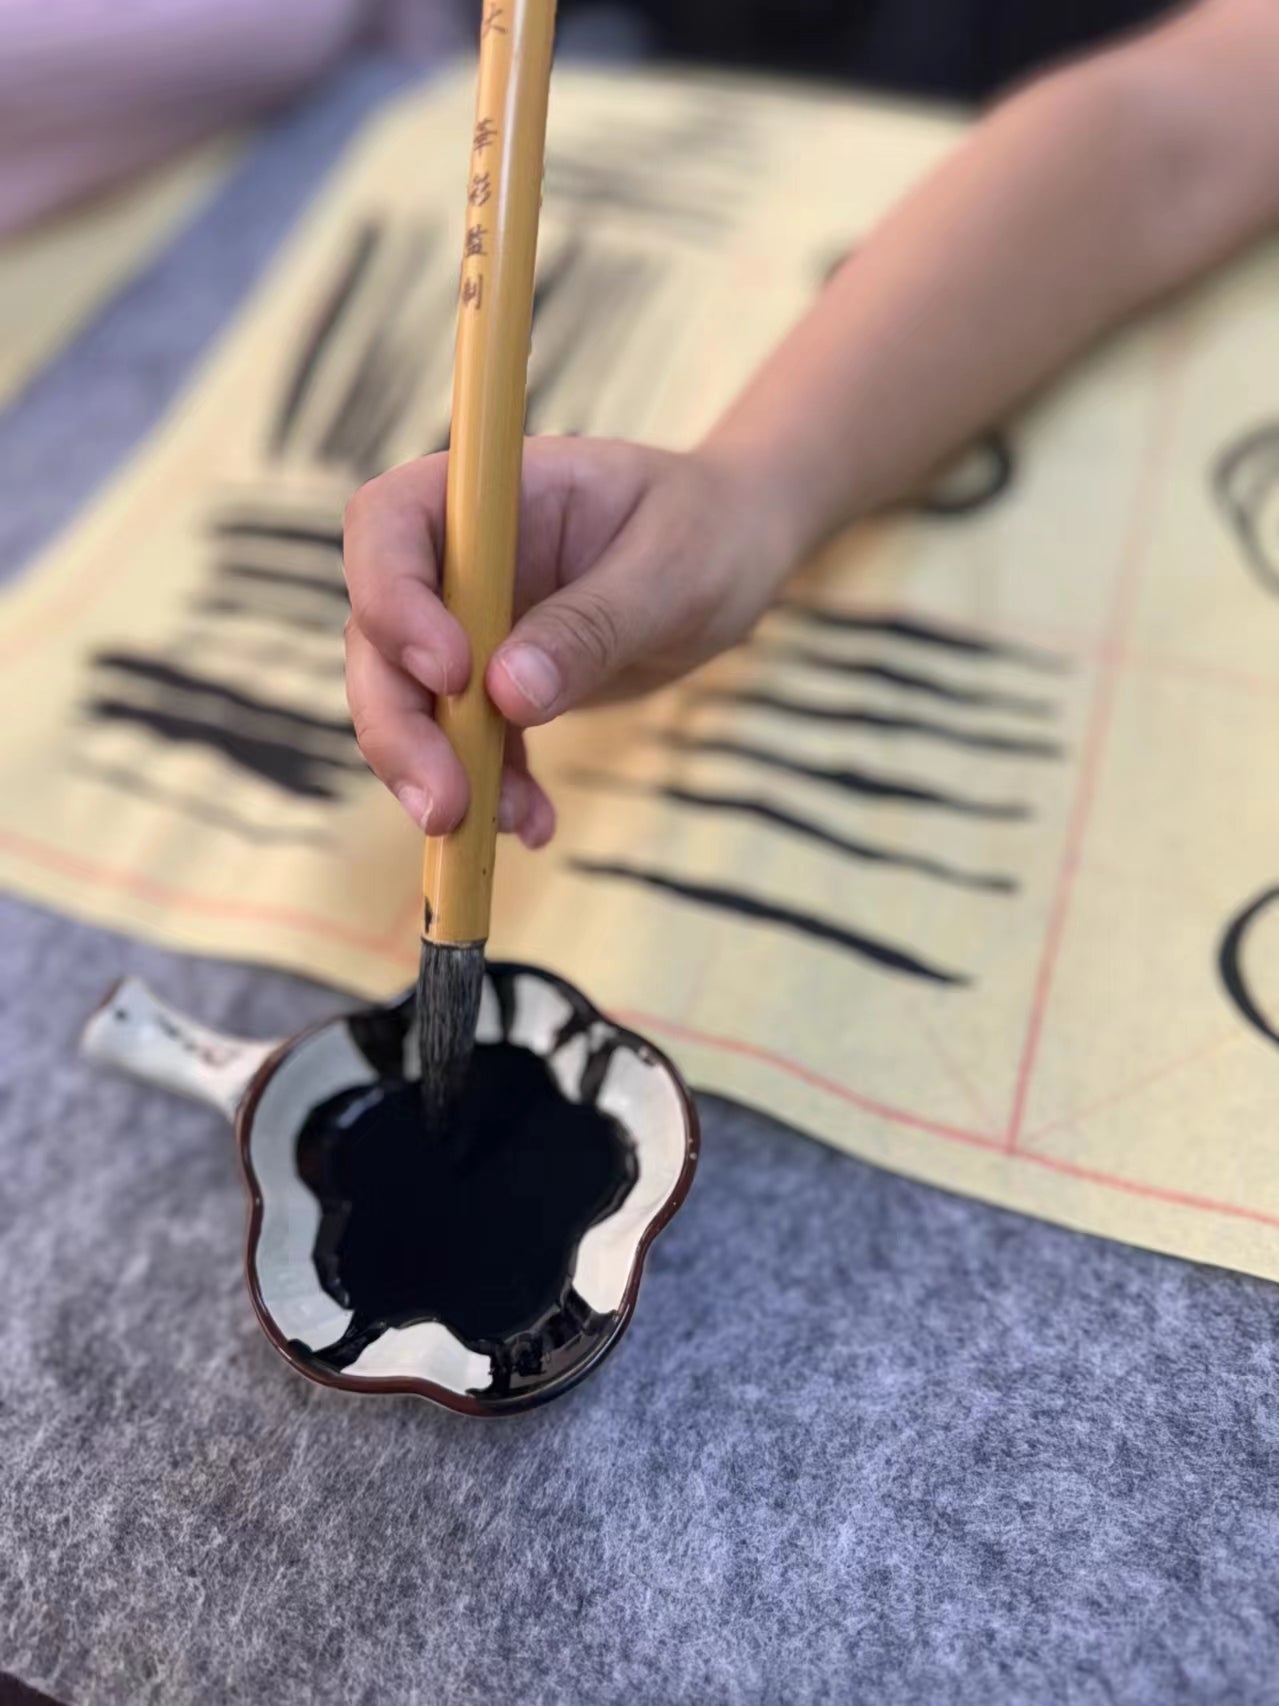 Free Chinese Brush Calligraphy 60 Minutes Trial Class